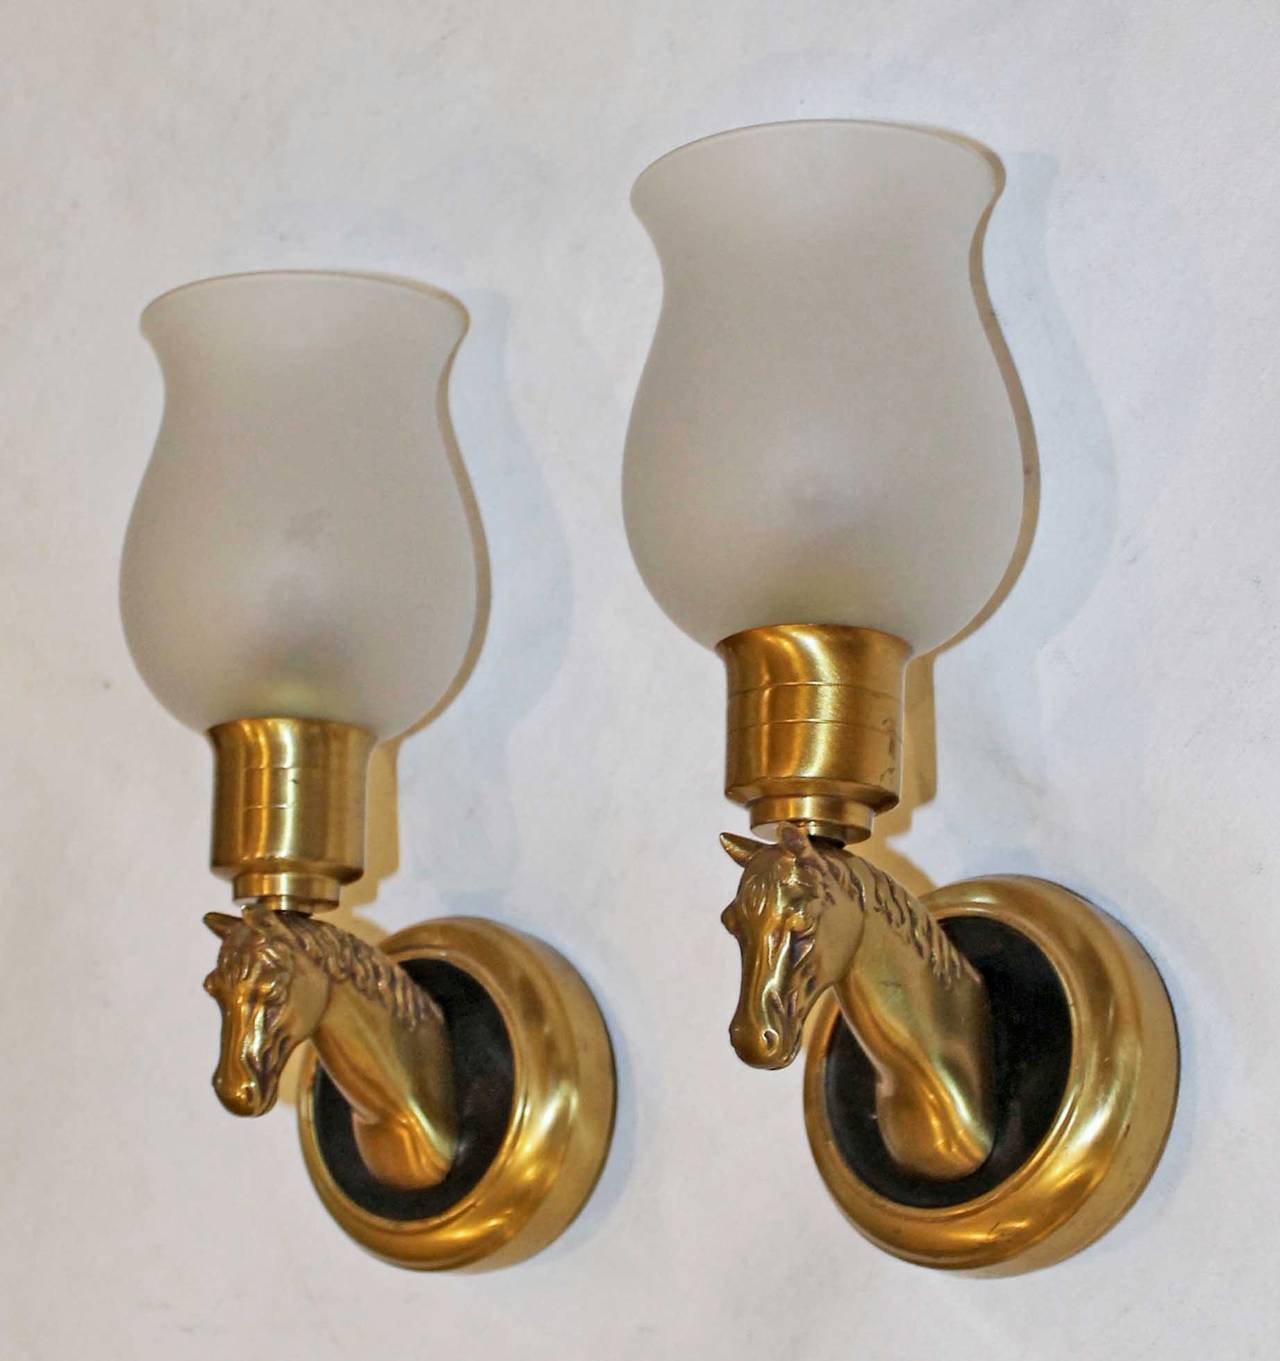 Pair of dimunitive polished and darkened brass horse wall sconces with matte glass shades. Rewired. Each sconce uses 1 - 40 watt max candelabra base bulbs.